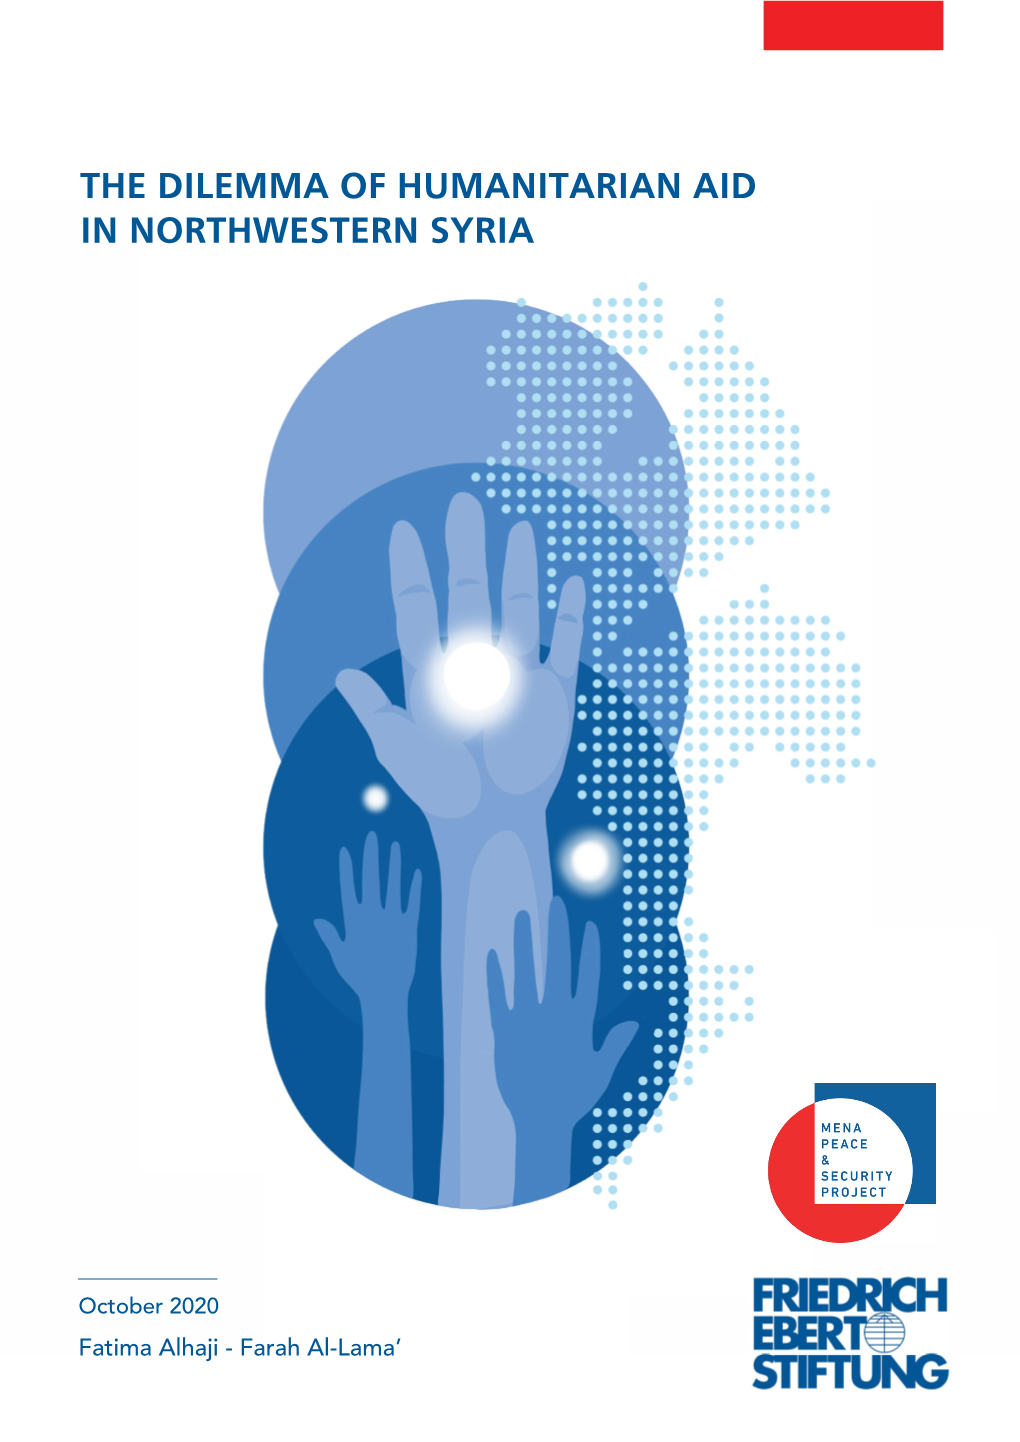 The Dilemma of Humanitarian Aid in Northwestern Syria